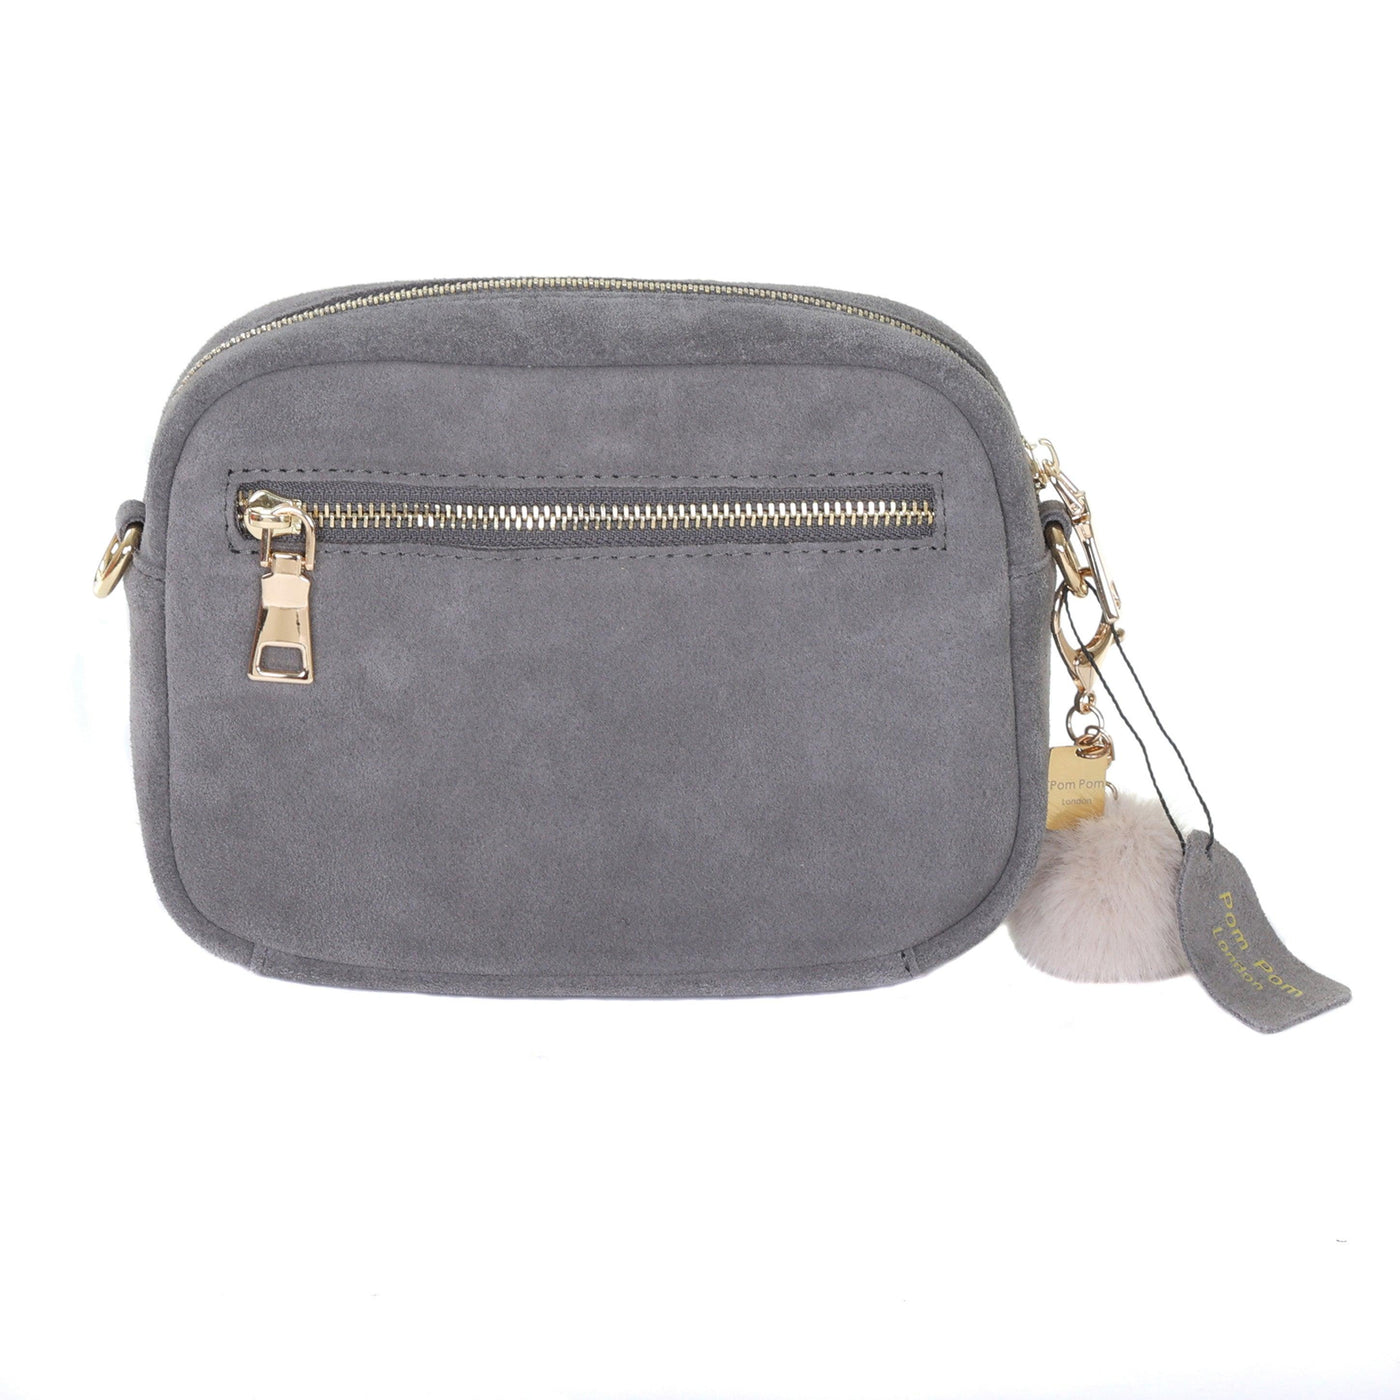 Mayfair Suede Bag Charcoal & Accessories - Pom Pom London